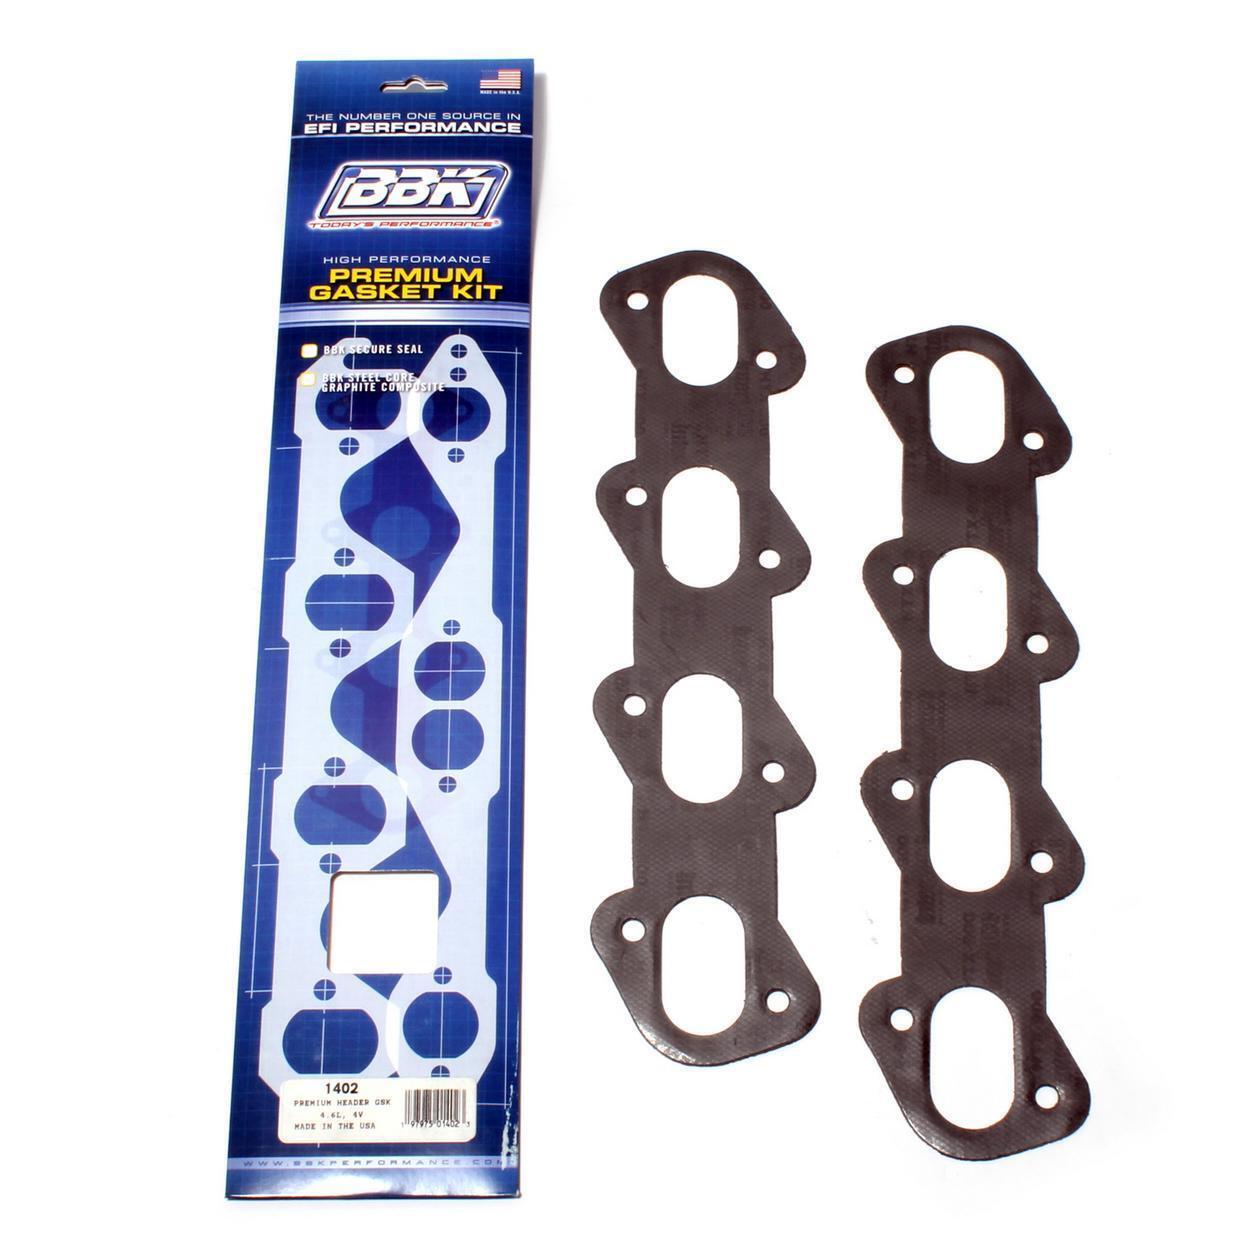 Exhaust Manifold Gasket Set for 1999-2002 Ford F-150 Lightning Supercharged 5.4L